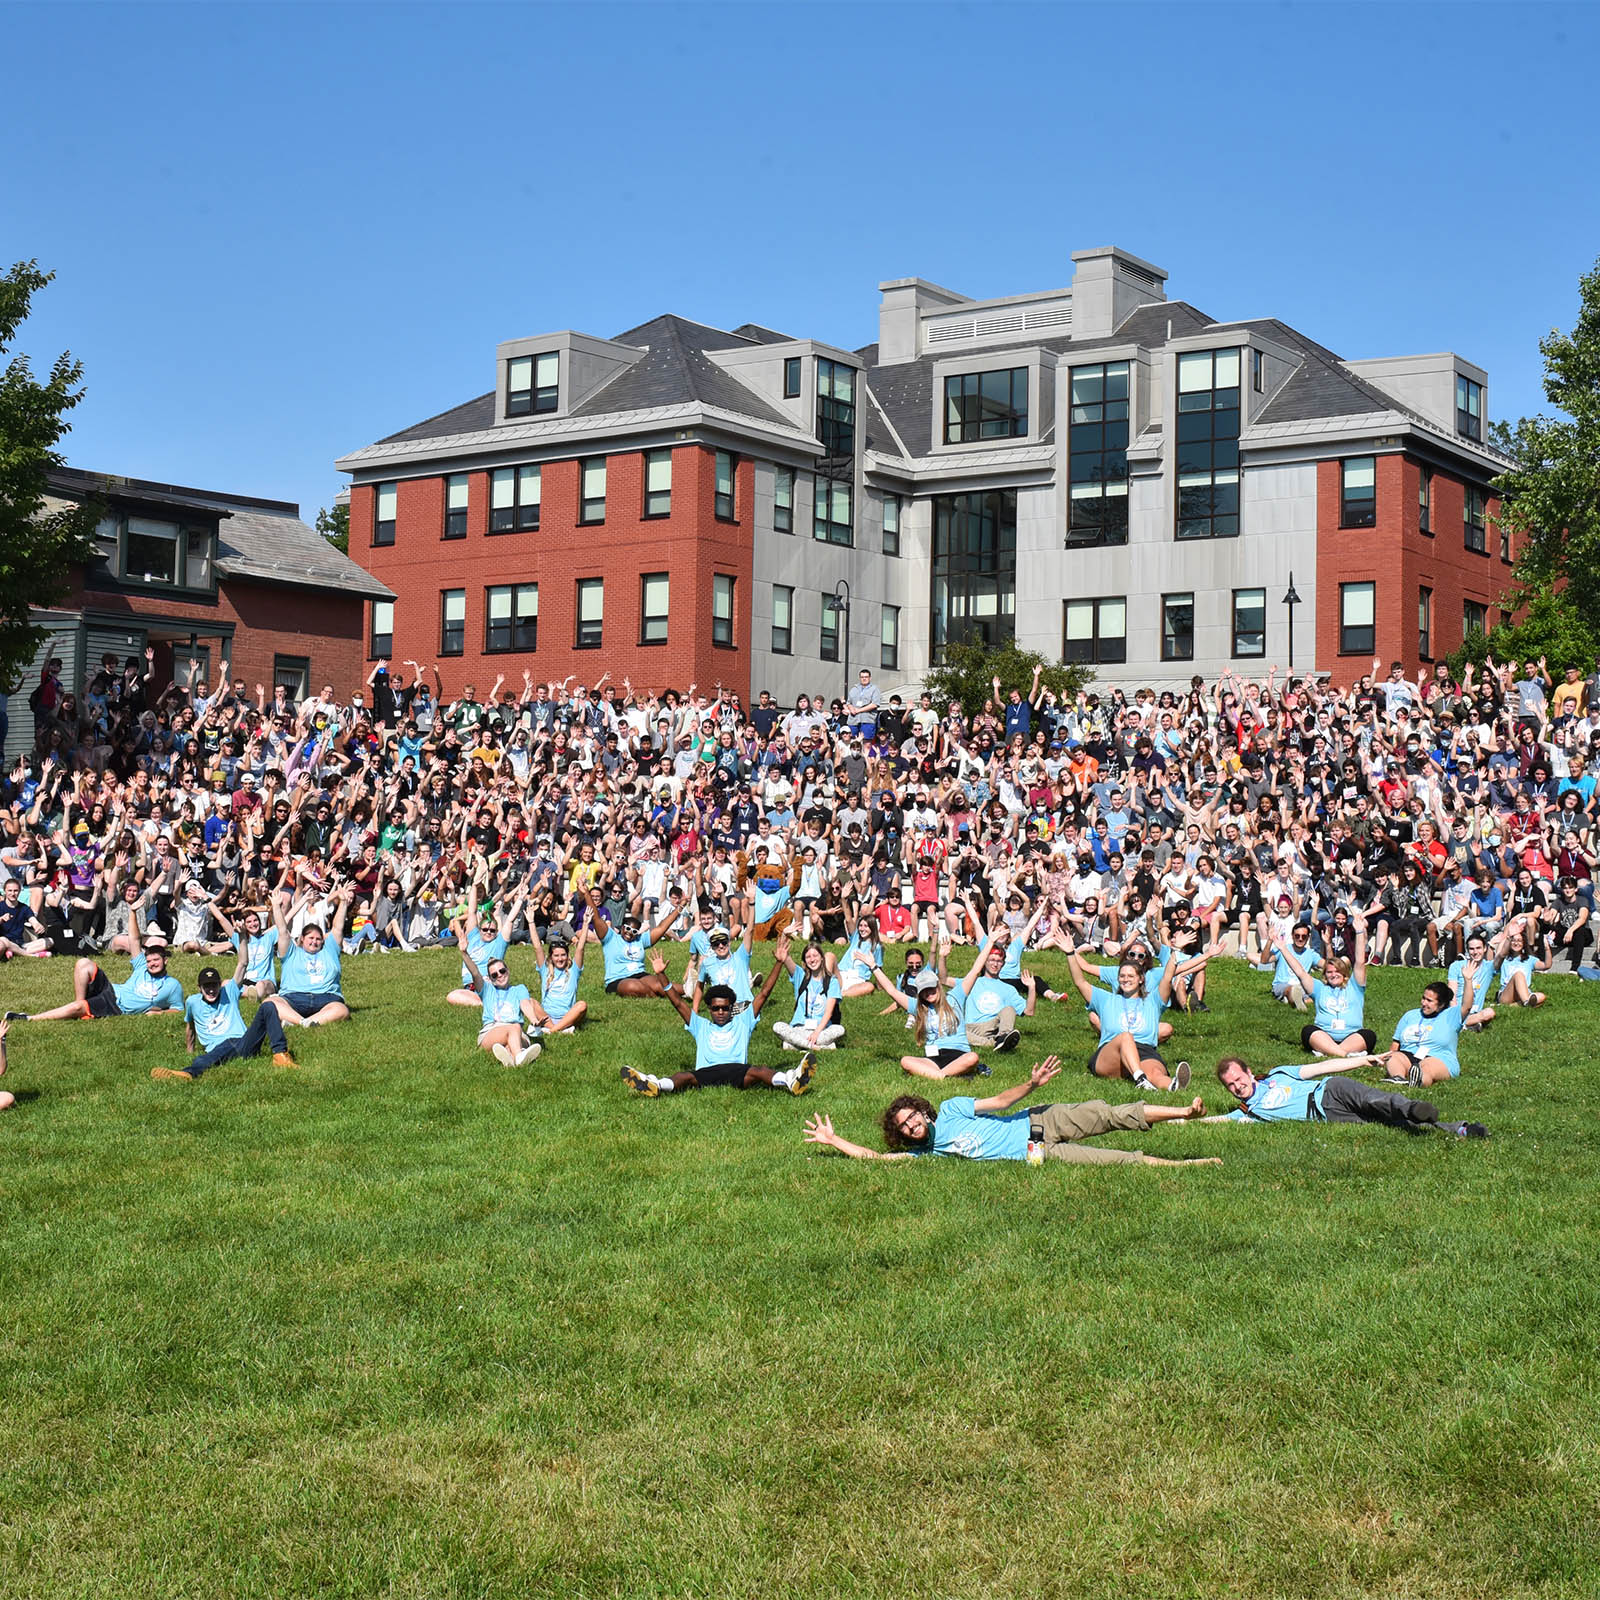 hundreds of new students gather on a campus green with matching blue t-shirts for orientation